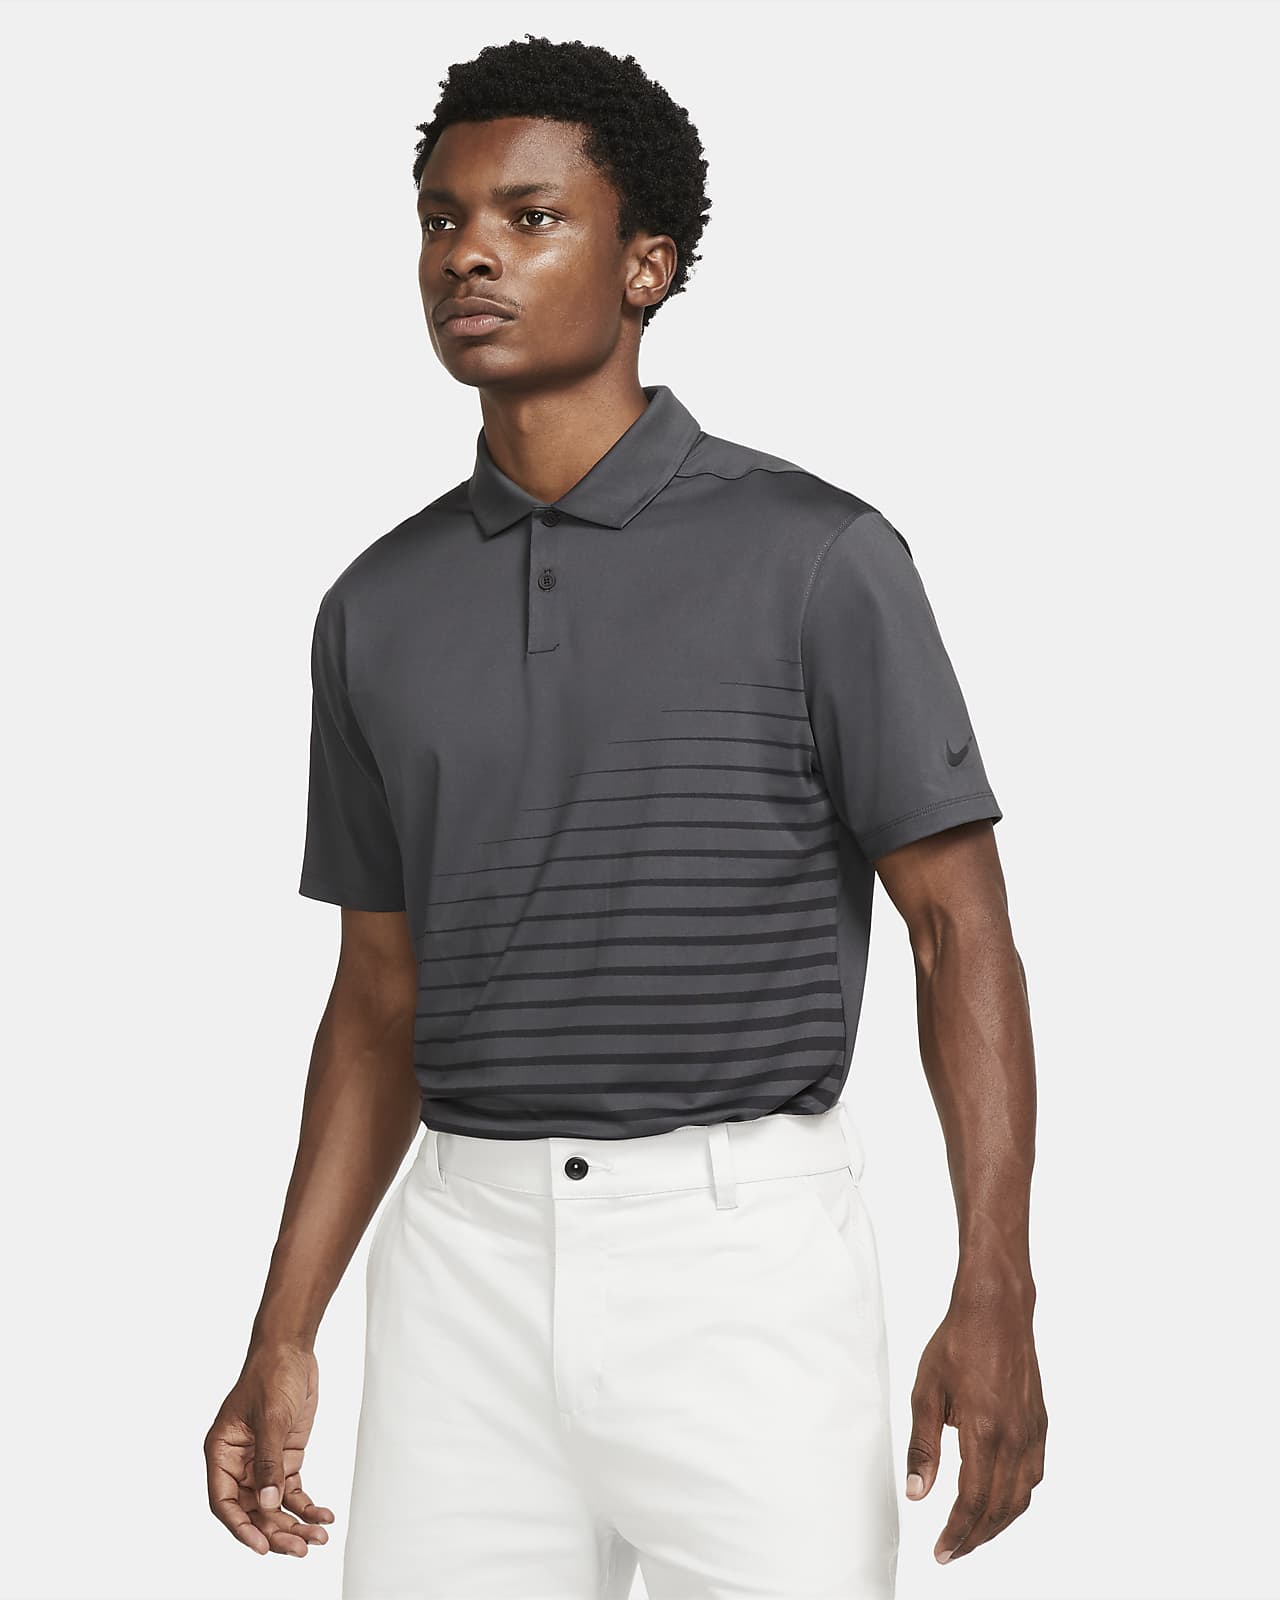 fitted golf shirts